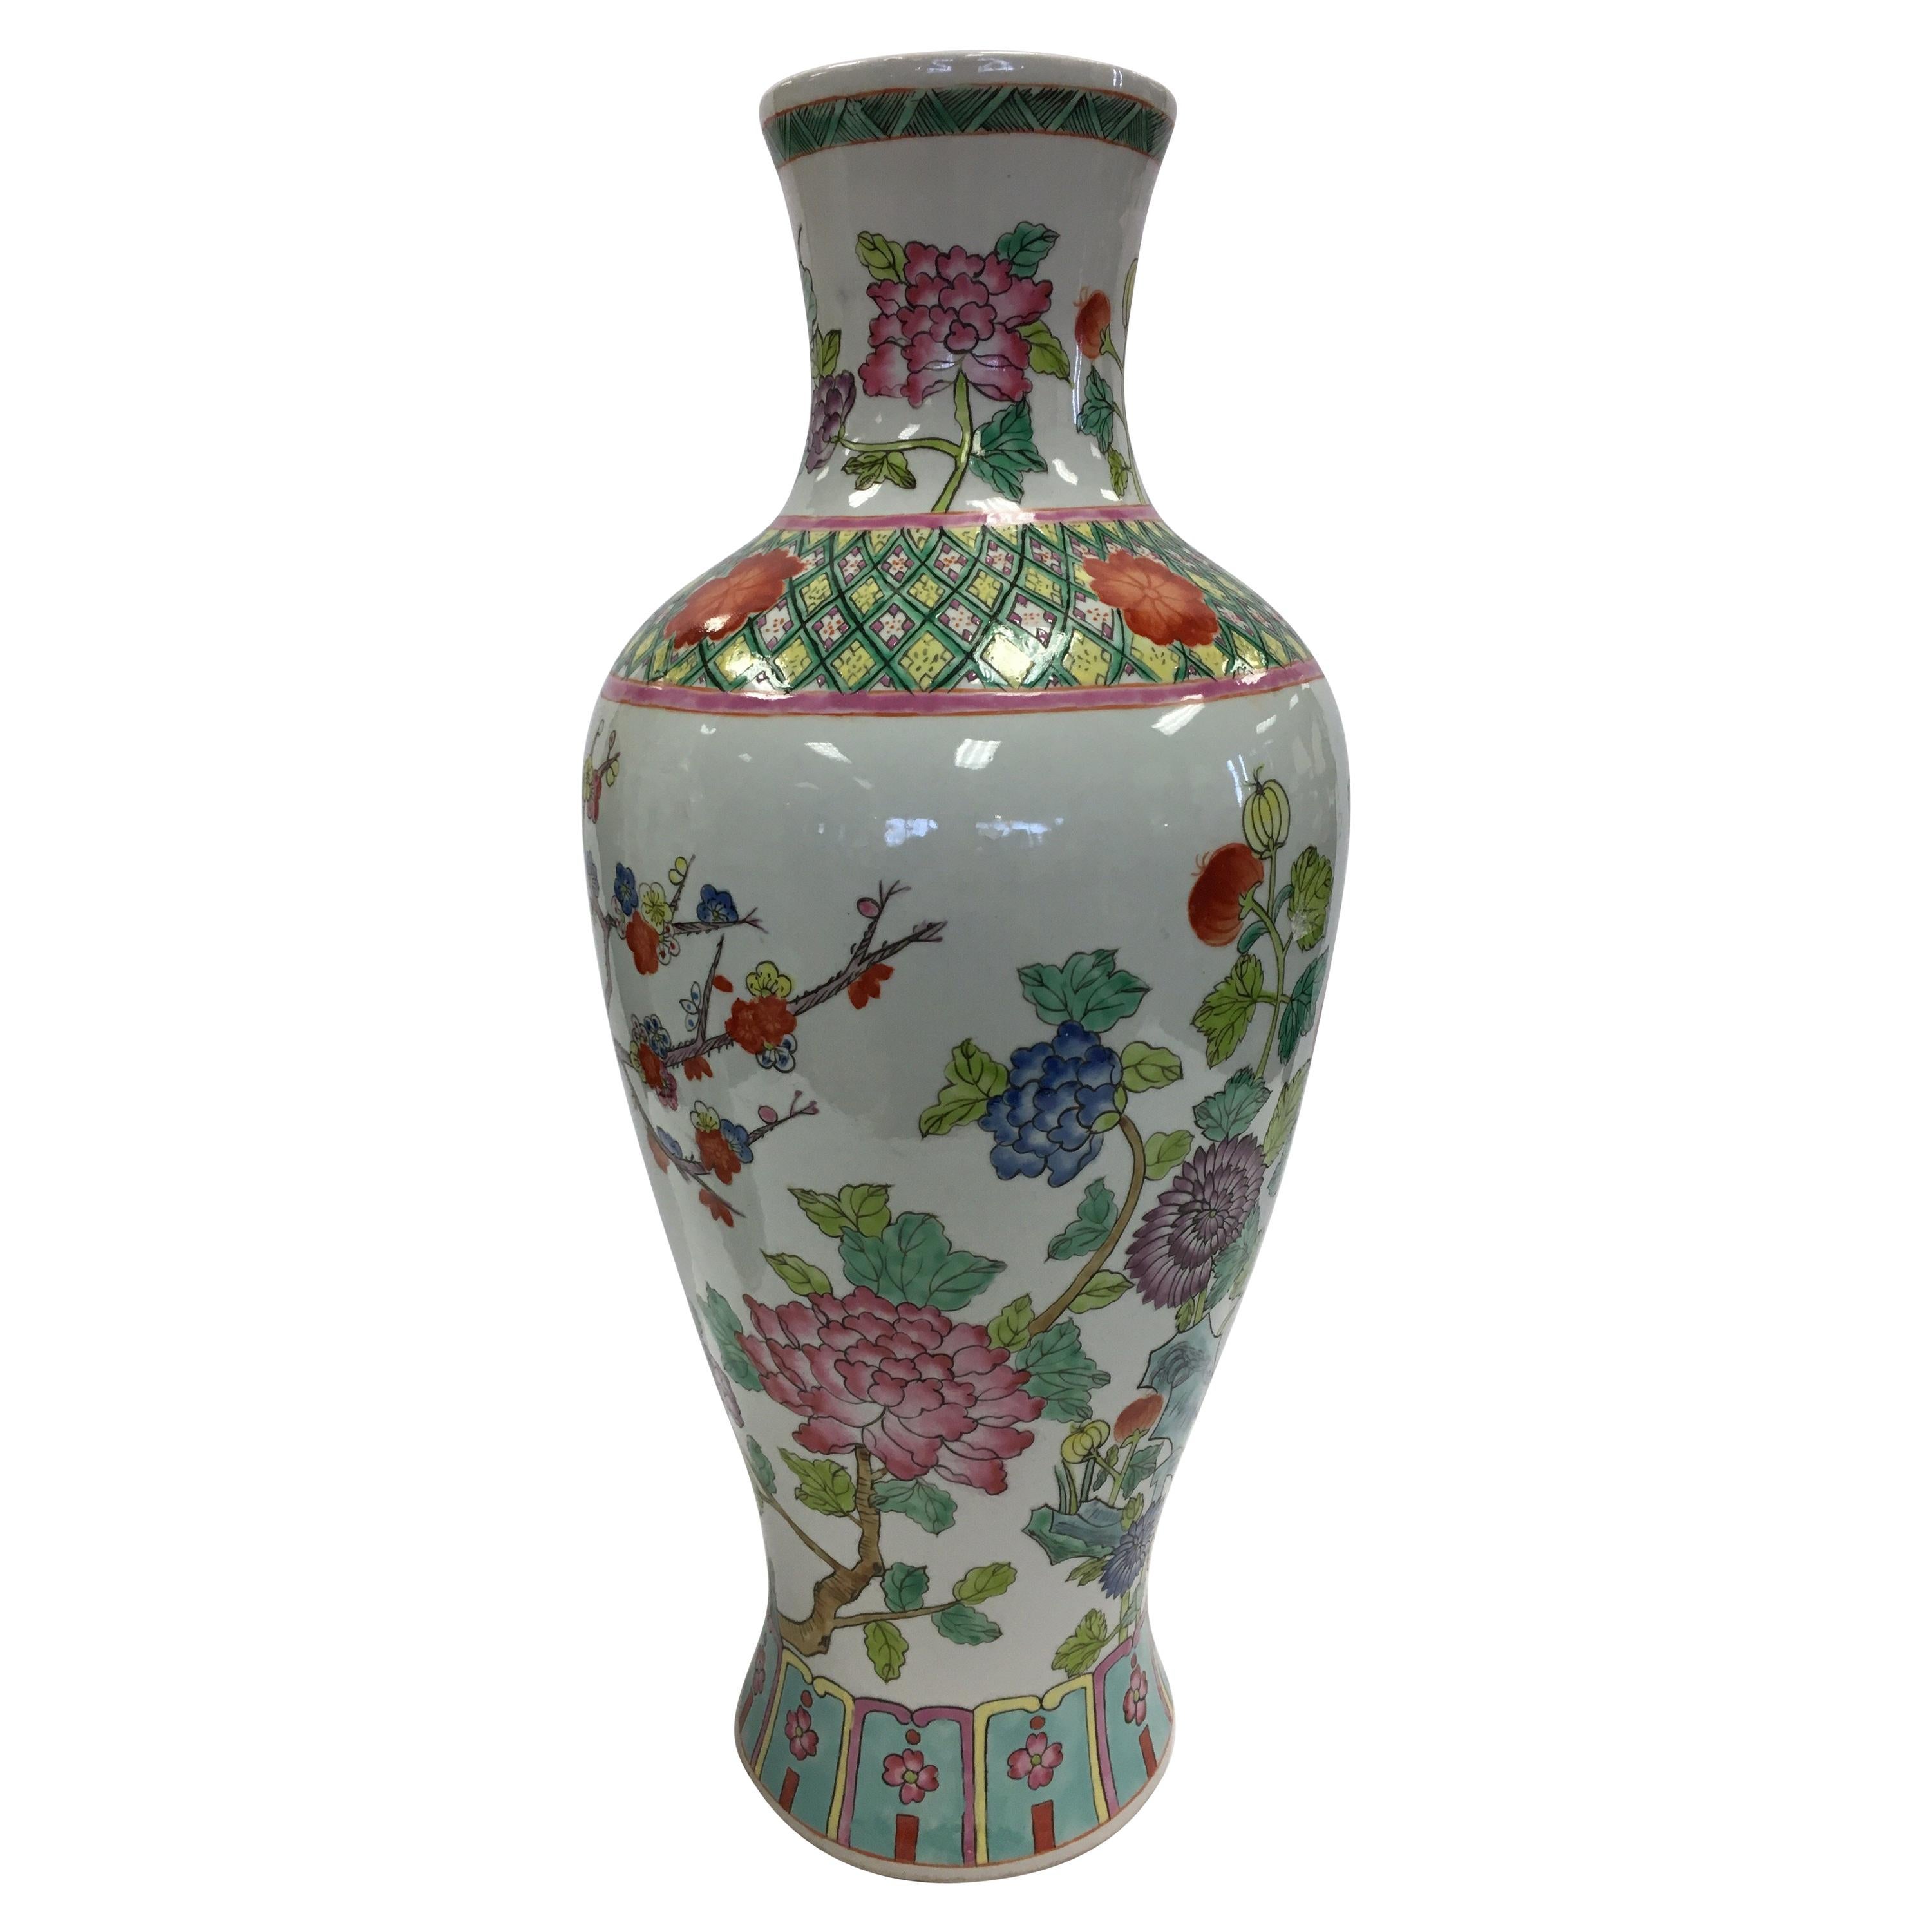 Chinese Asian Baluster Form Porcelain Vase with Intricate Painted Flowers & Vine